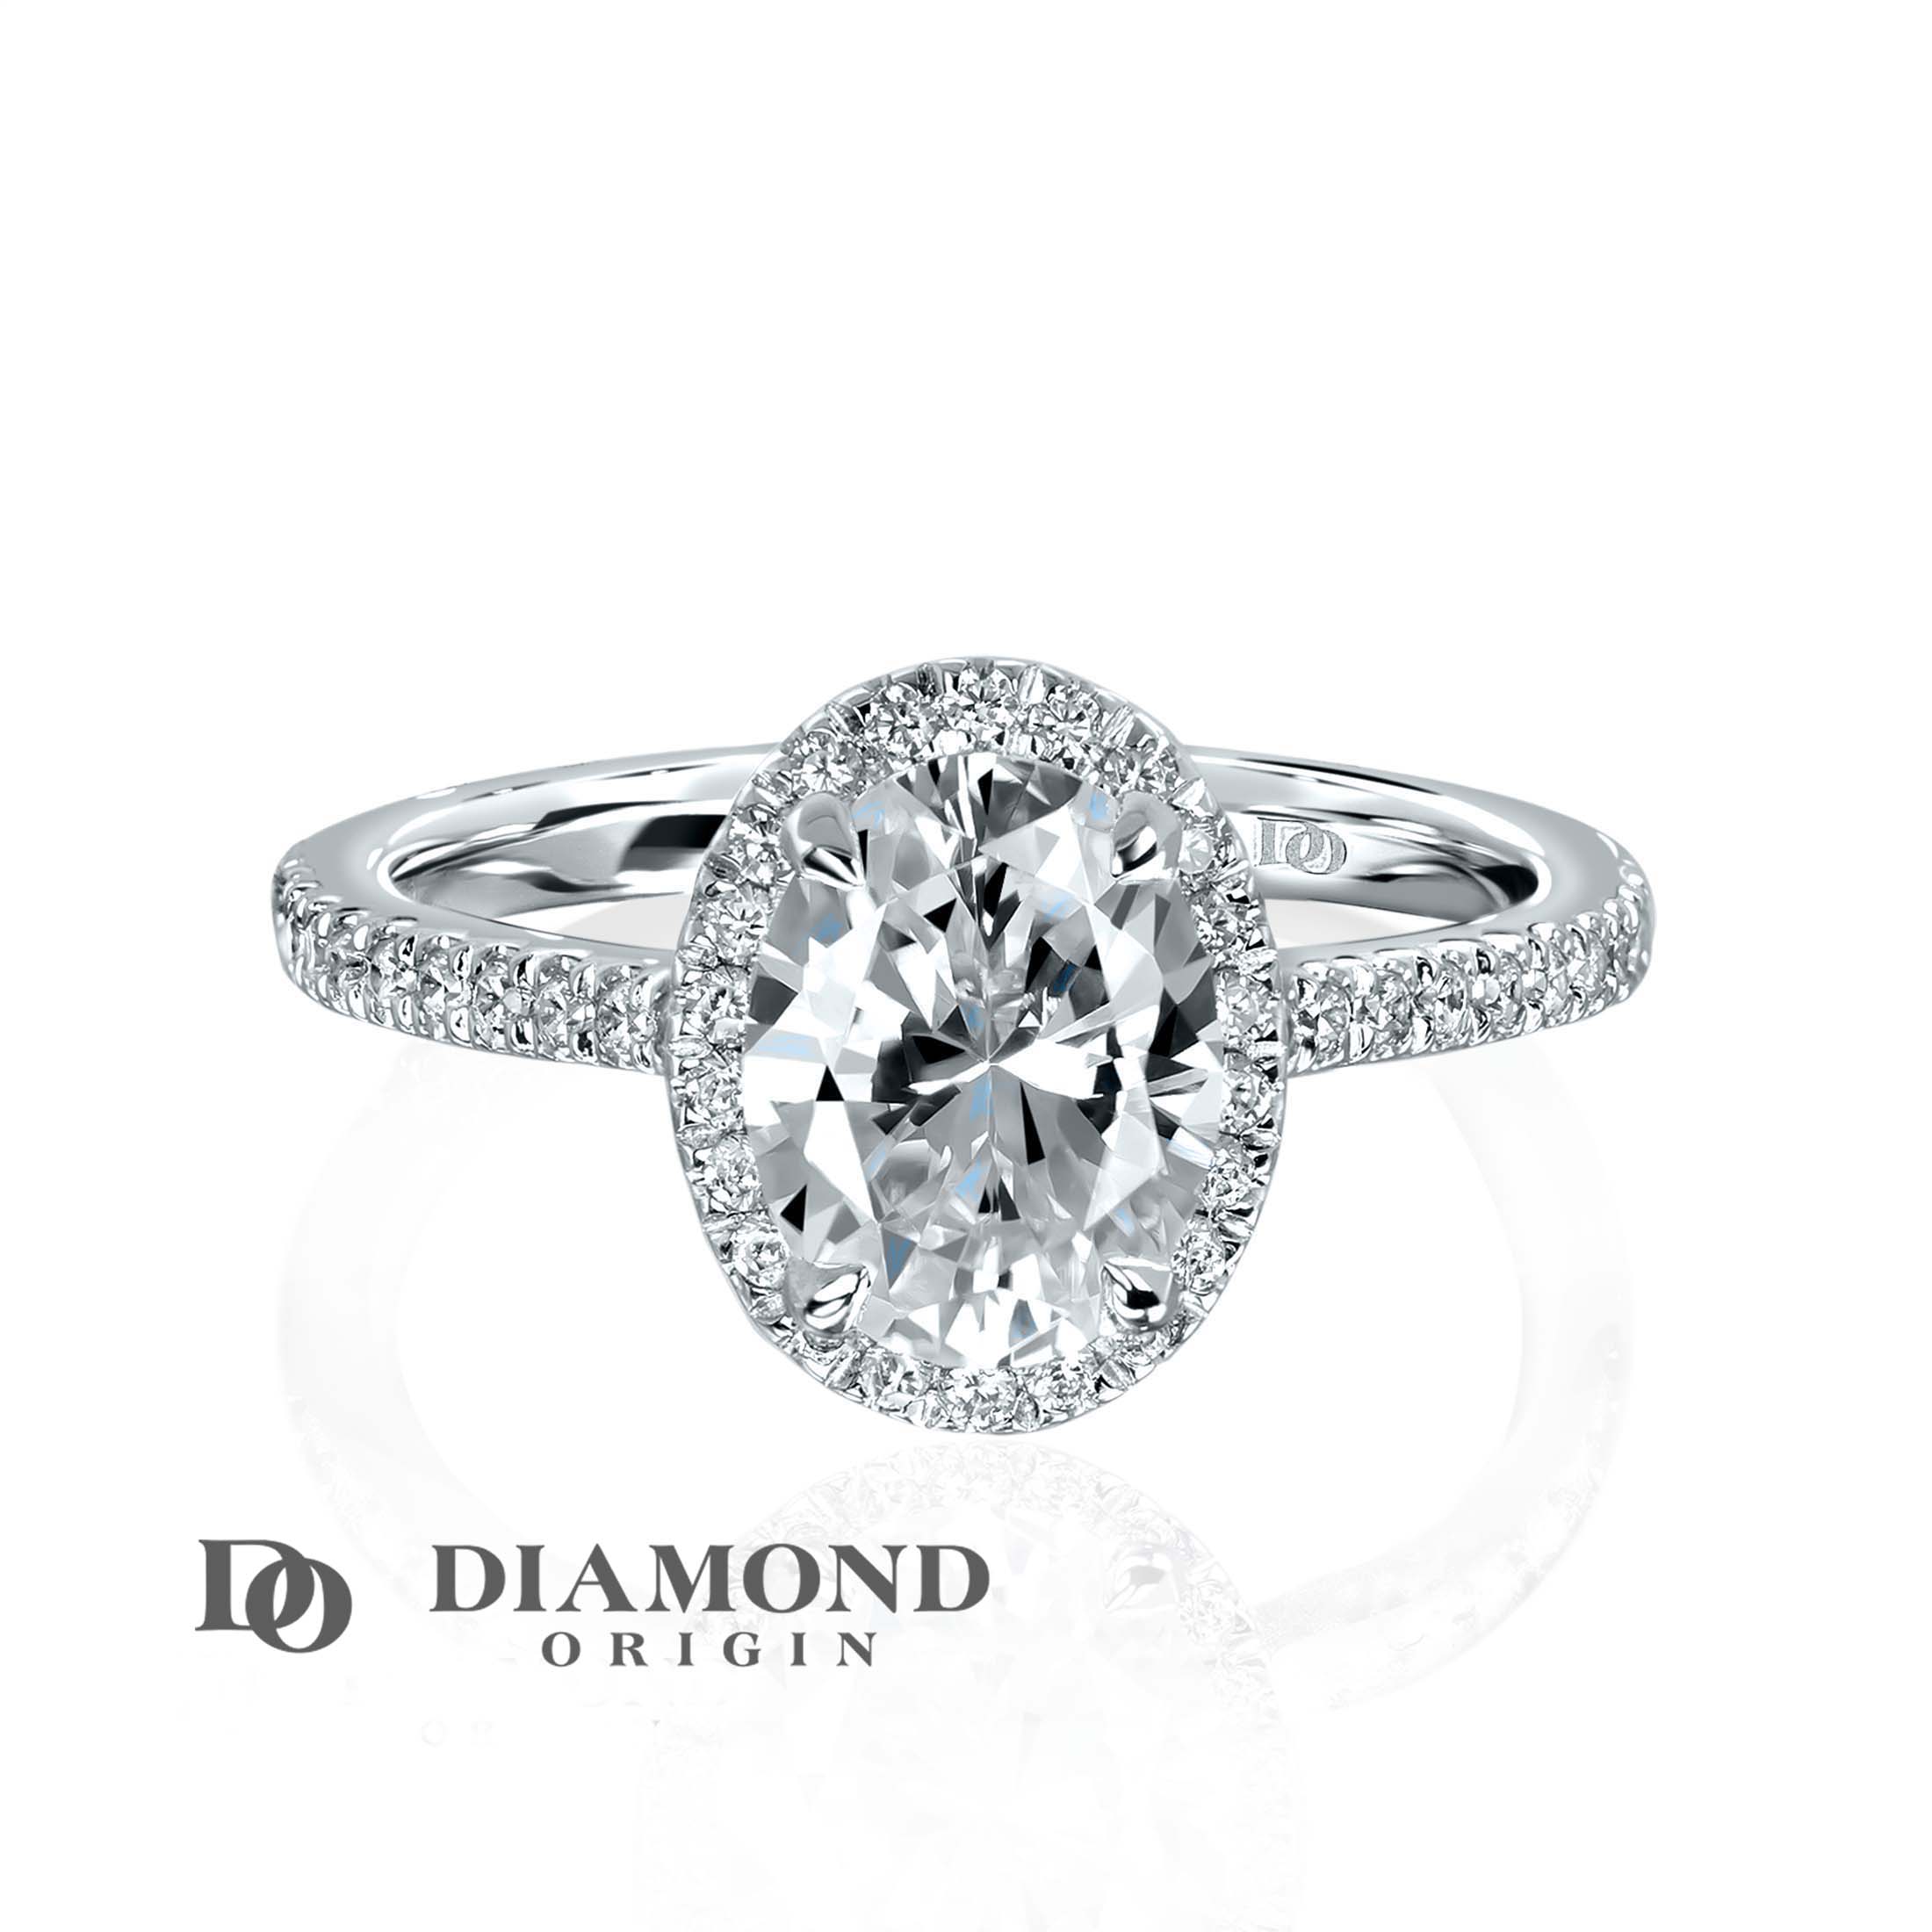 Sell Your Diamond Ring Online For The Most Value | Worthy